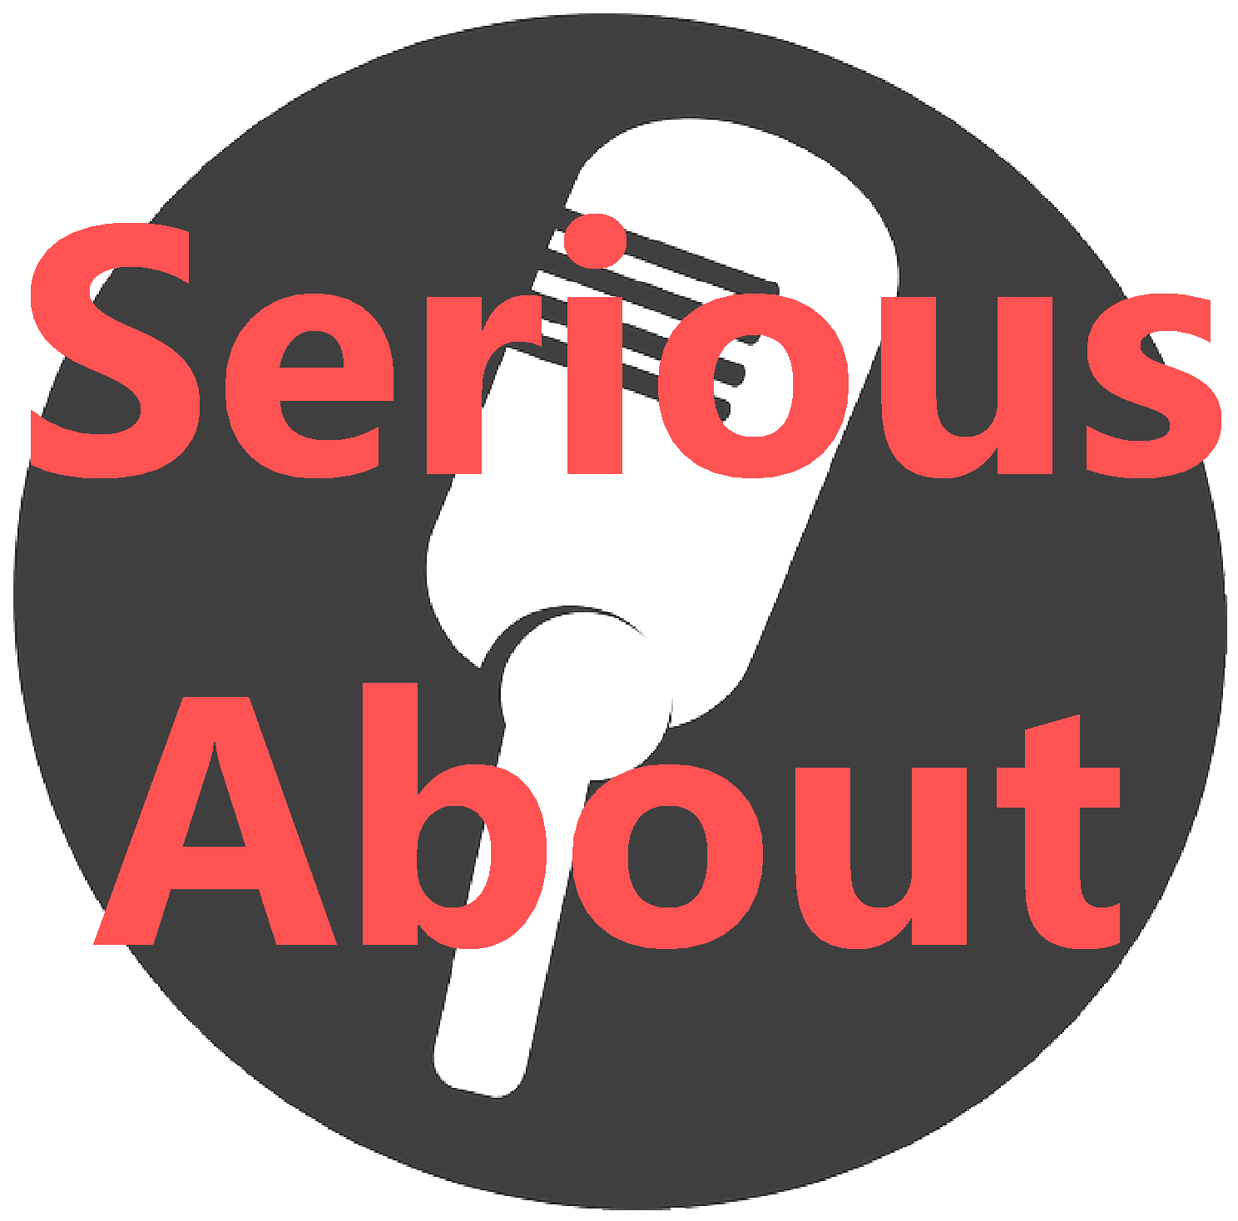 "Serious About Tech" in a red color on top of a white microphone in a dark gray circle